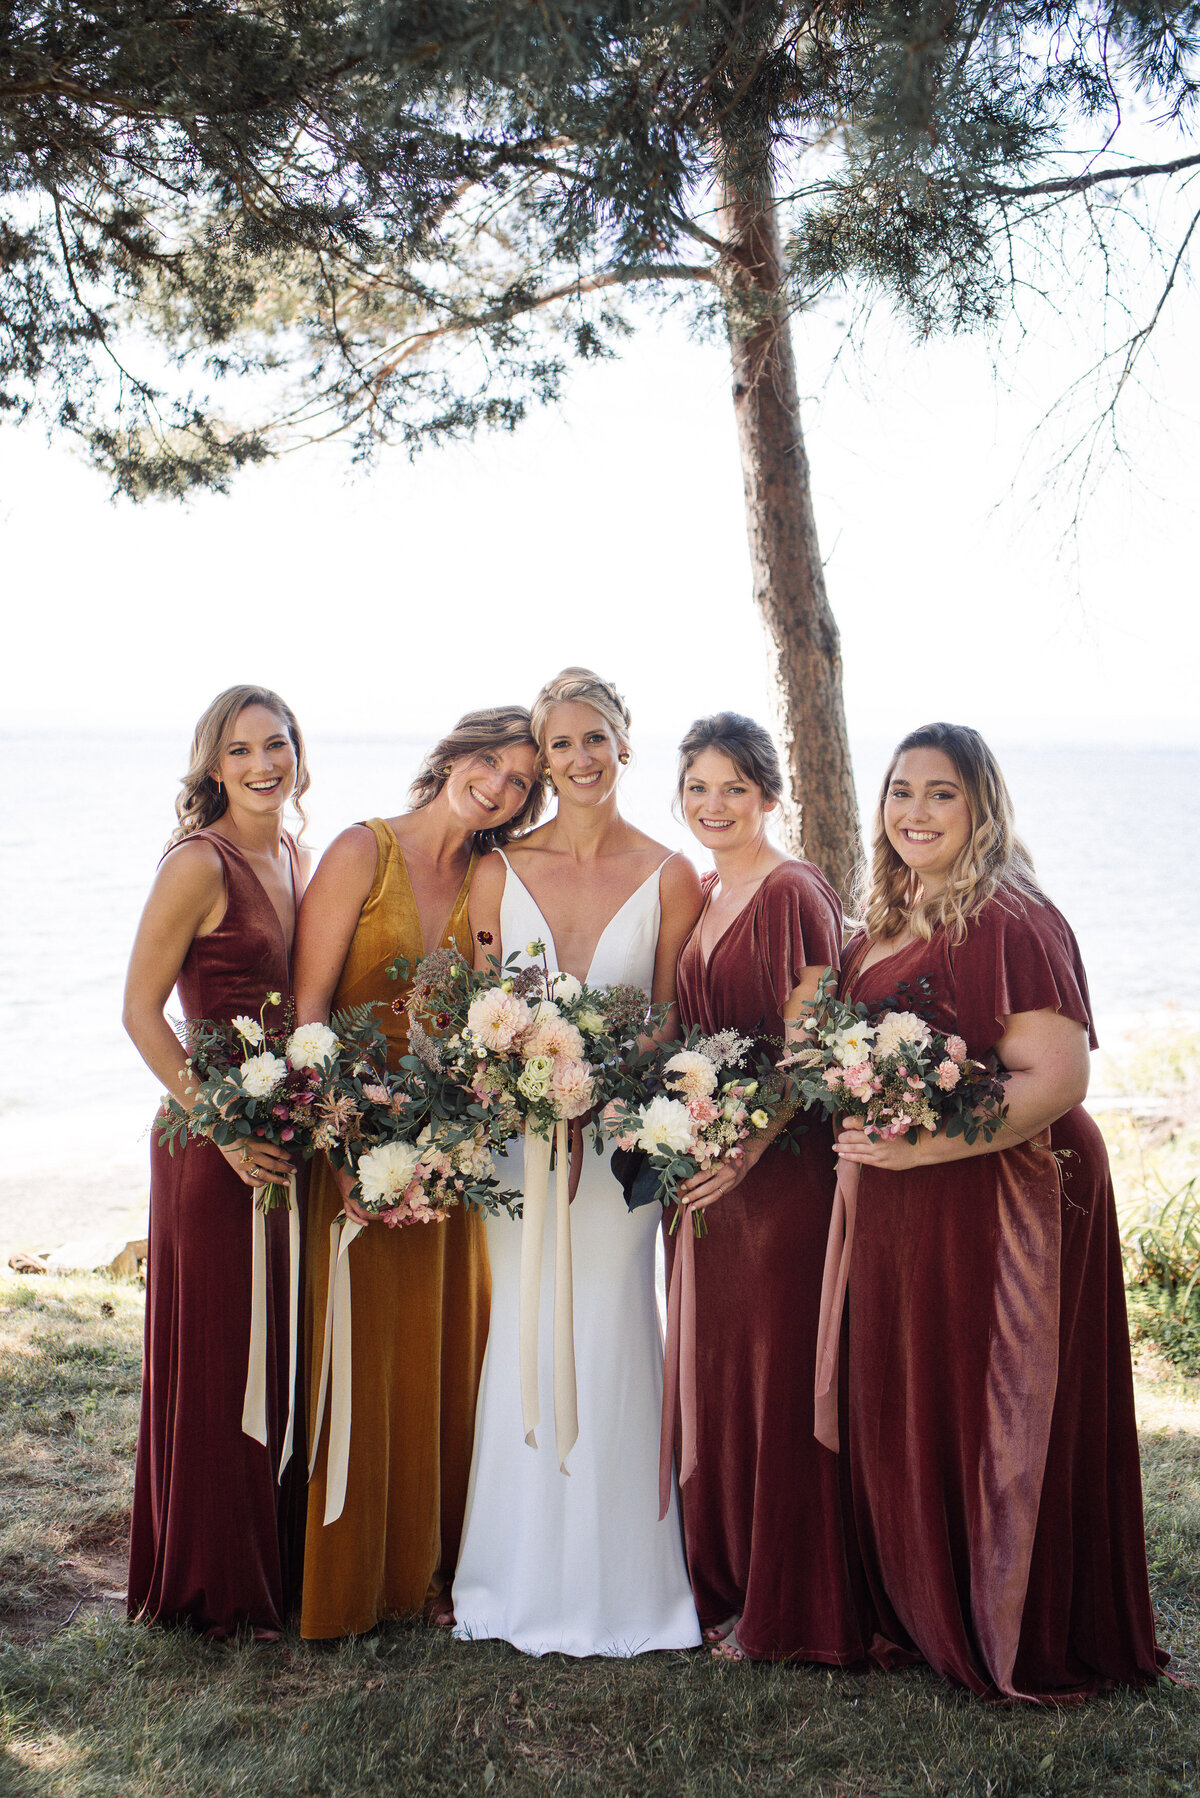 New england Fall wedding bridesmaids  dresses by Jenny yoo. Mismatched and in velvet.